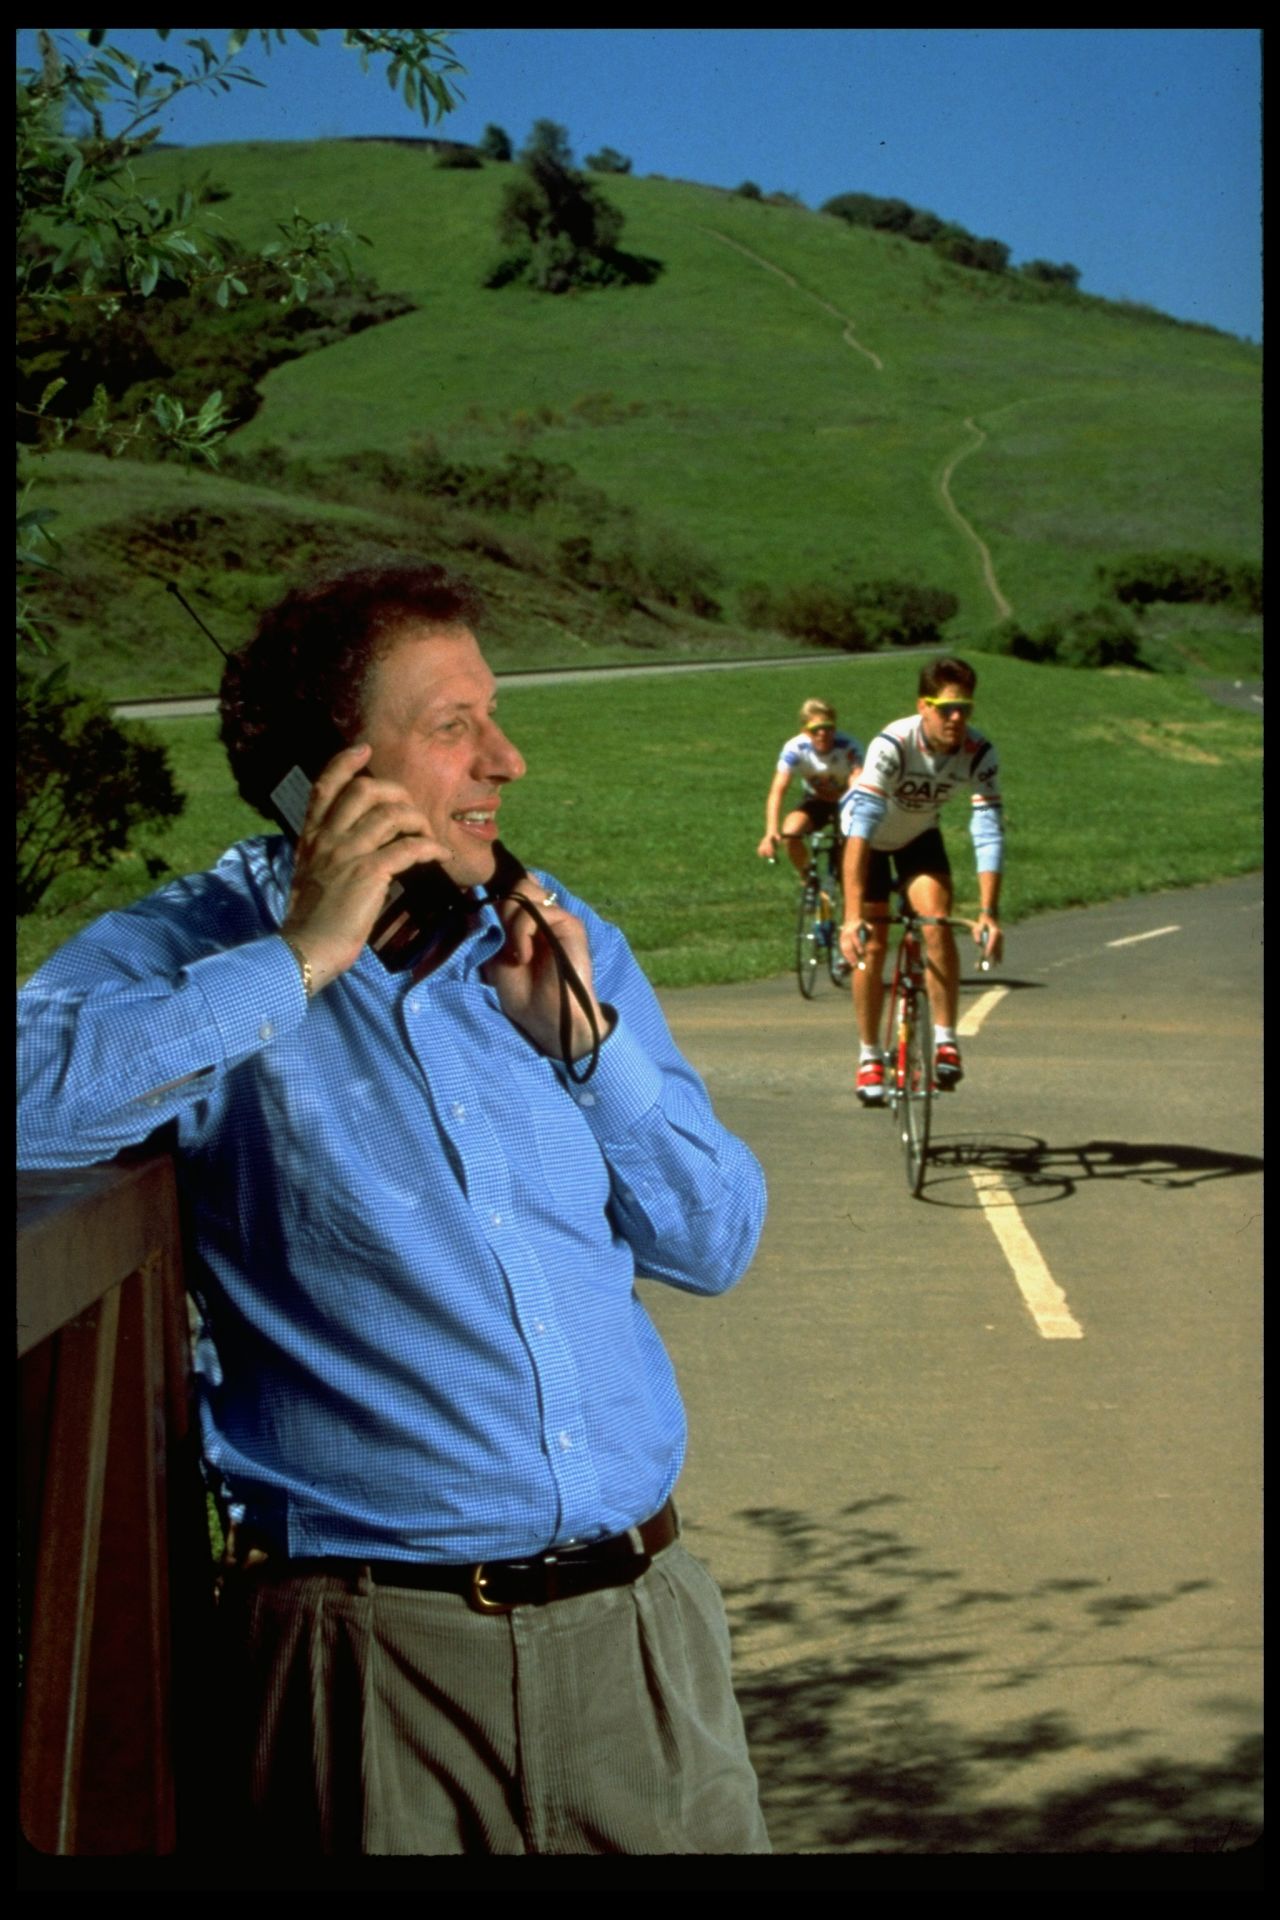 It's no iPhone. In this image from 1989, Allan Z. Loren, then-president of Apple Computer USA, talks on a mobile phone as cyclists ride past. 